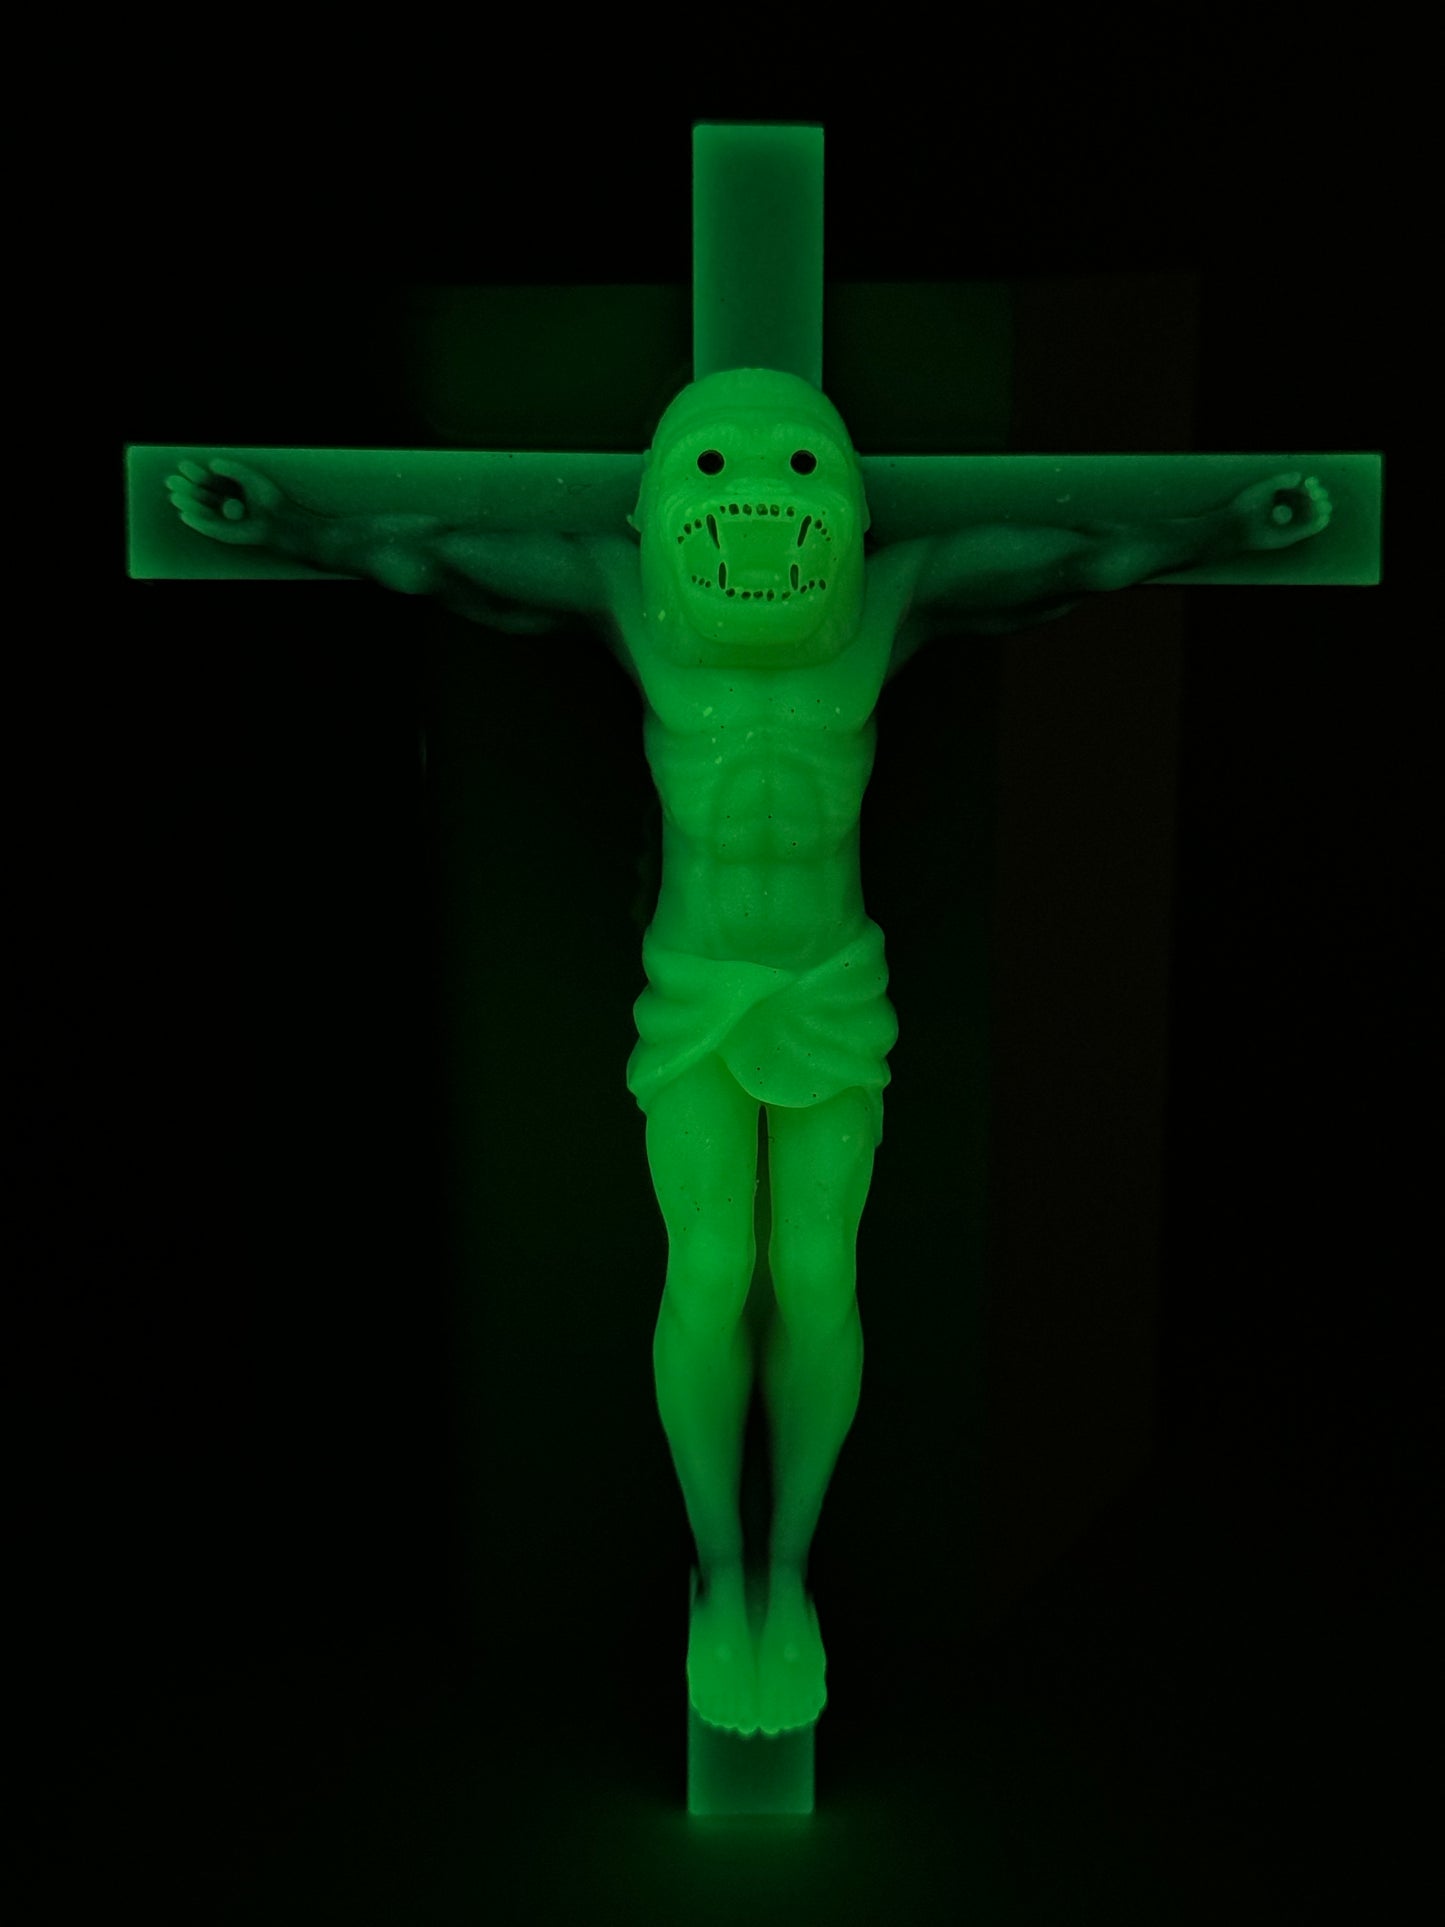 Christ on the Cross but he is an Ape, Magical Toy: Stay Awake All Night, Think of his Suffering